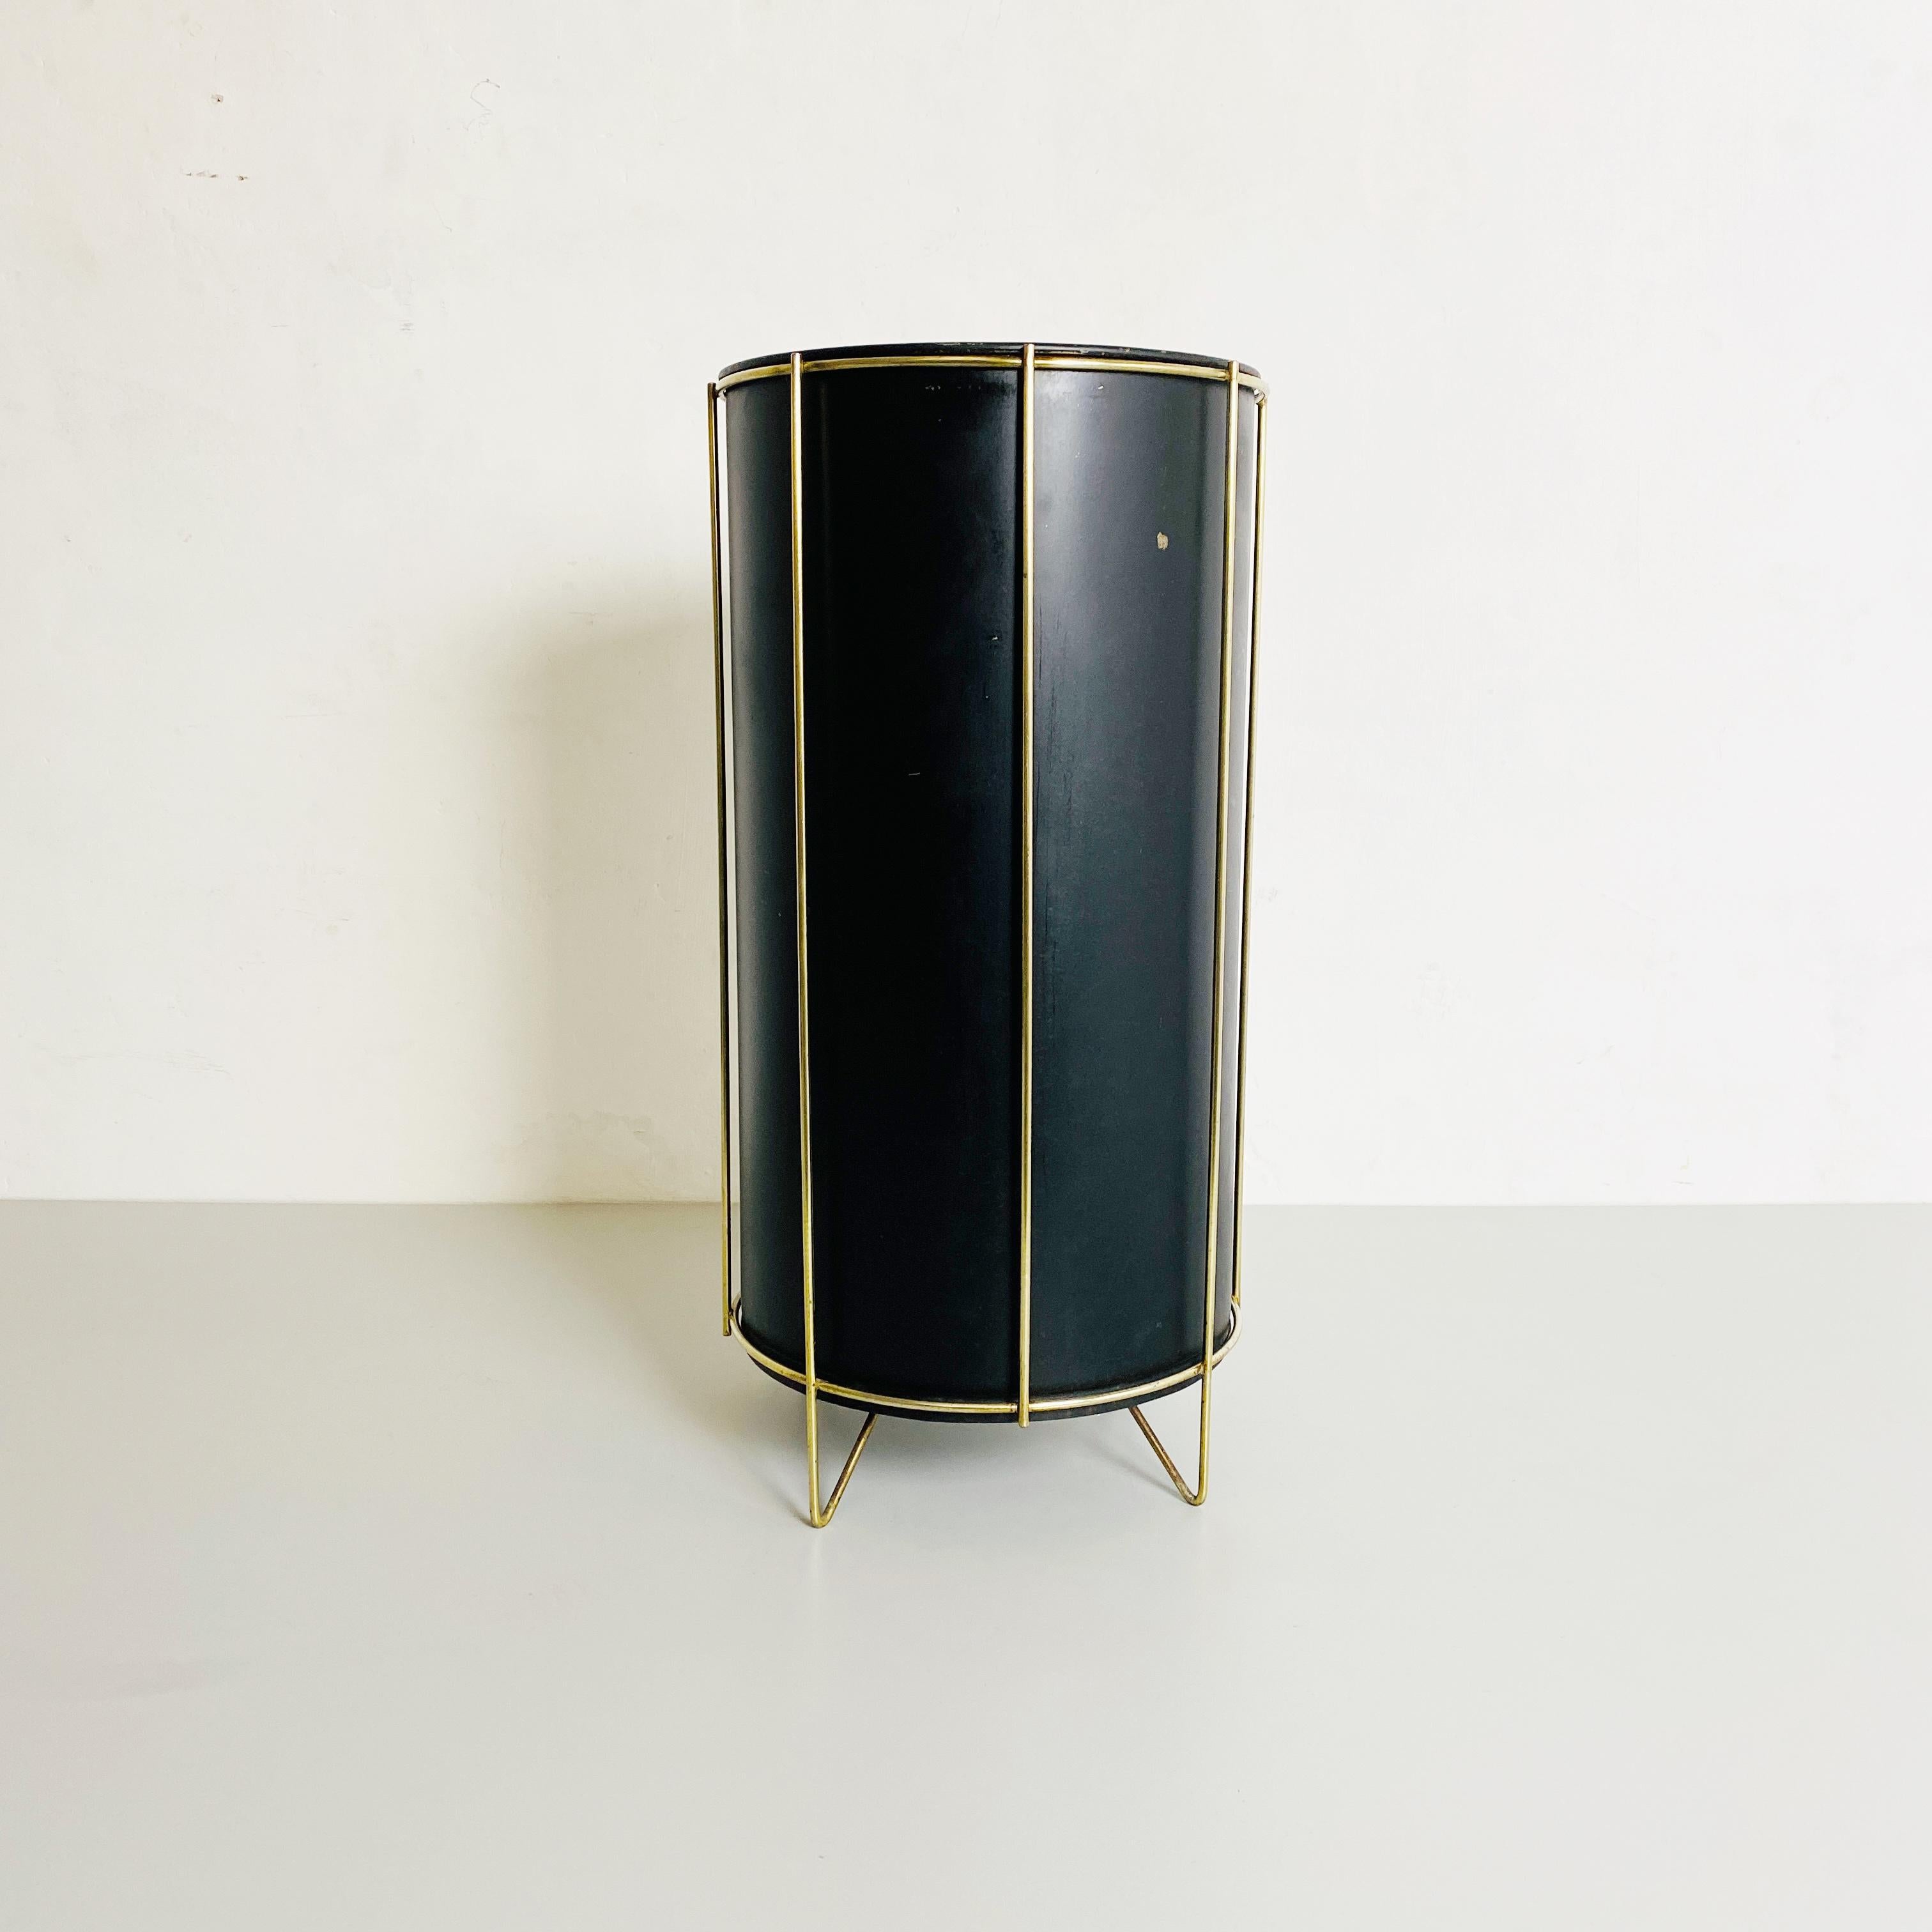 Metal and brass umbrella stand, from the 1950s.
Beautifull and very particular and rare, umbrella stand with black metal container and external structure in solid brass supports.
Tipical of the important house of the 1950s period 

Good condition,